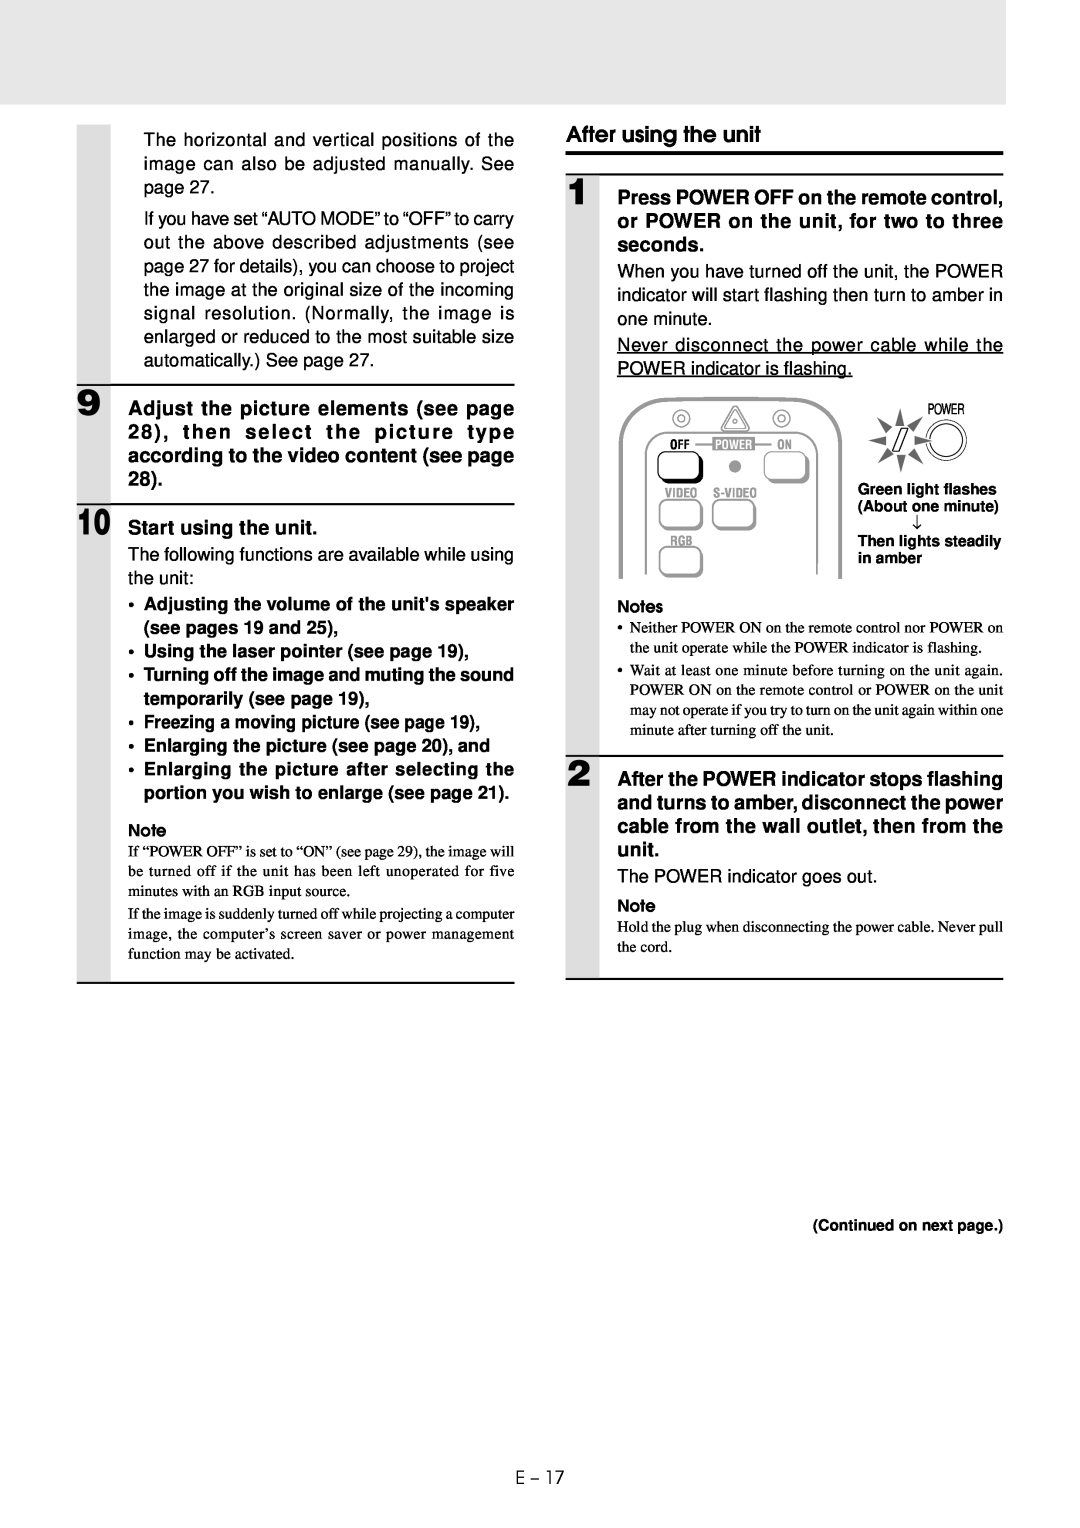 PLUS Vision U2-1130/U2-1110 user manual After using the unit, Start using the unit 